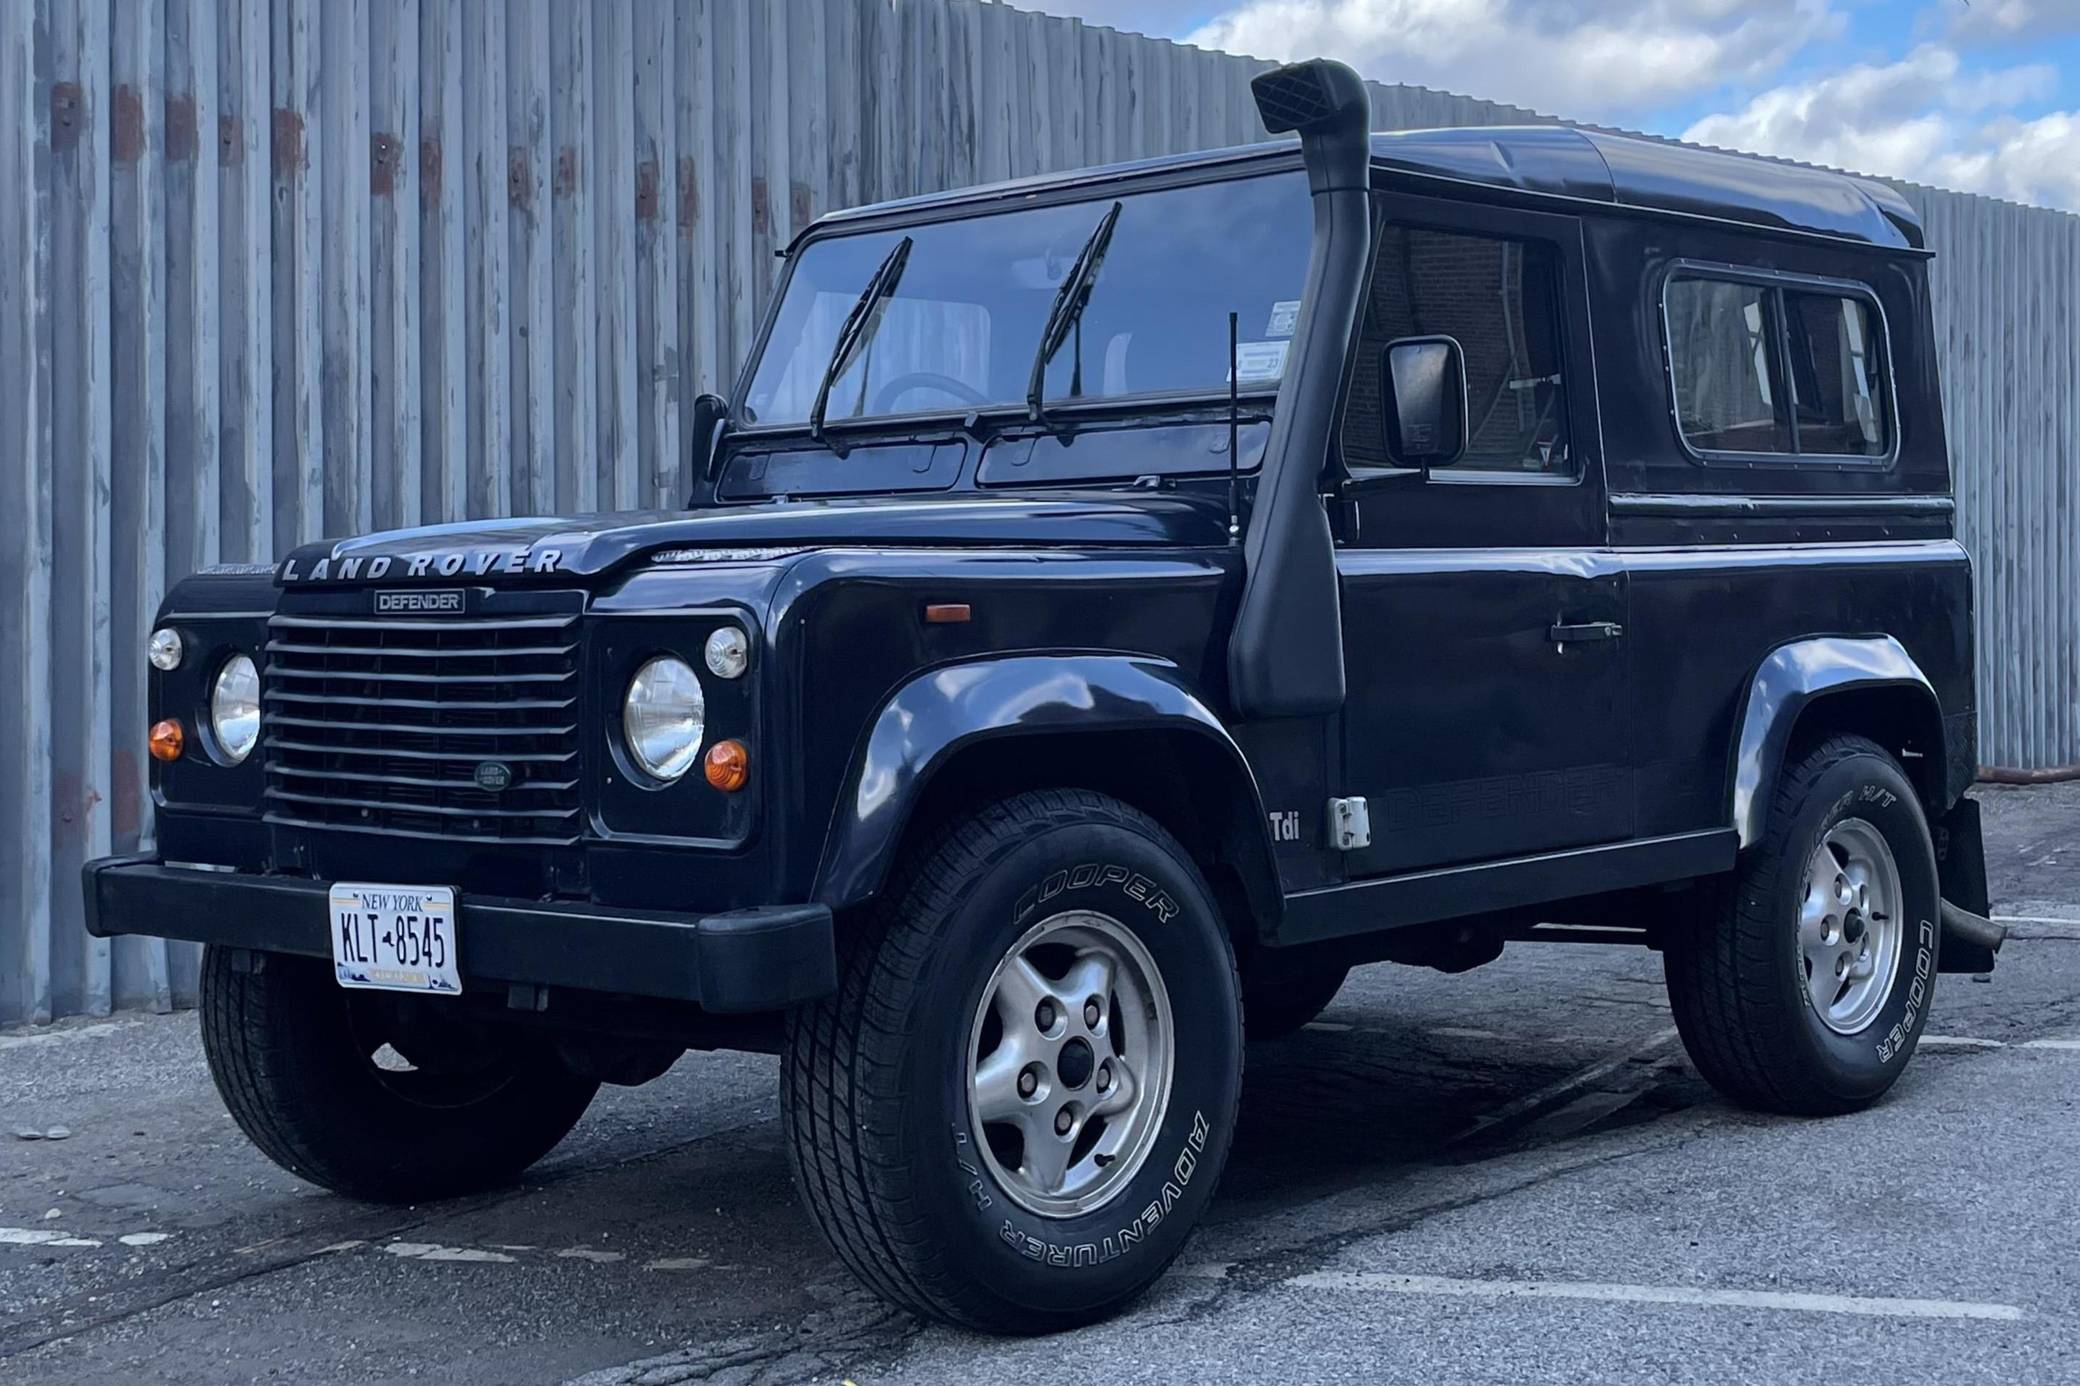 Land Rover Defender for Sale in New York